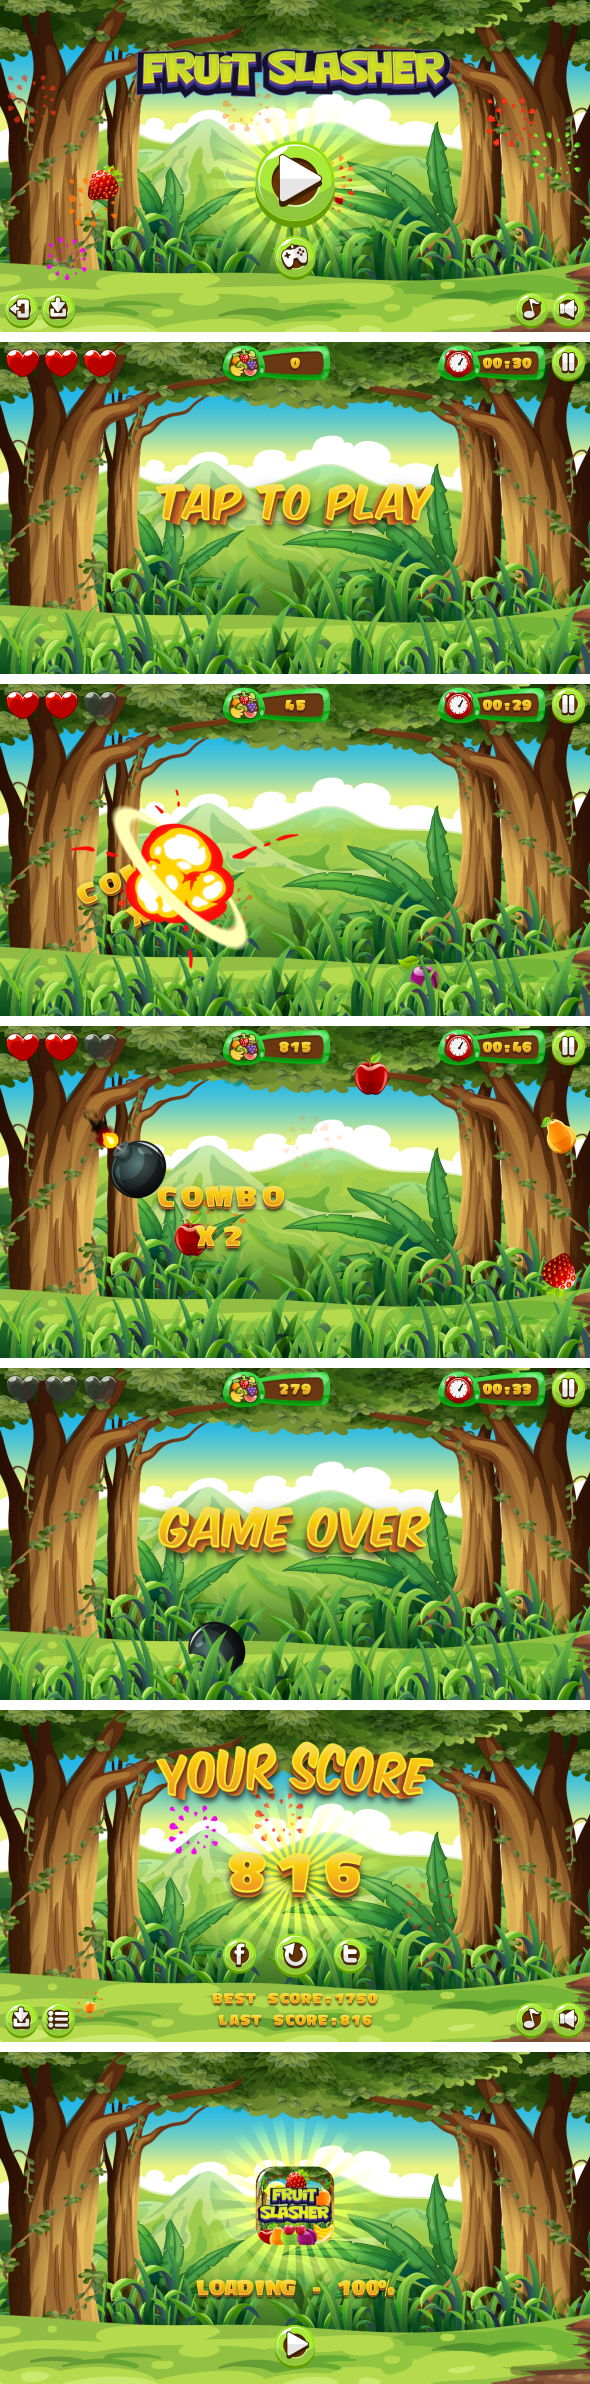 Fruit Slasher - HTML5 Game, Mobile Version+AdMob!!! (Construct 3 | Construct 2 | Capx) - 3